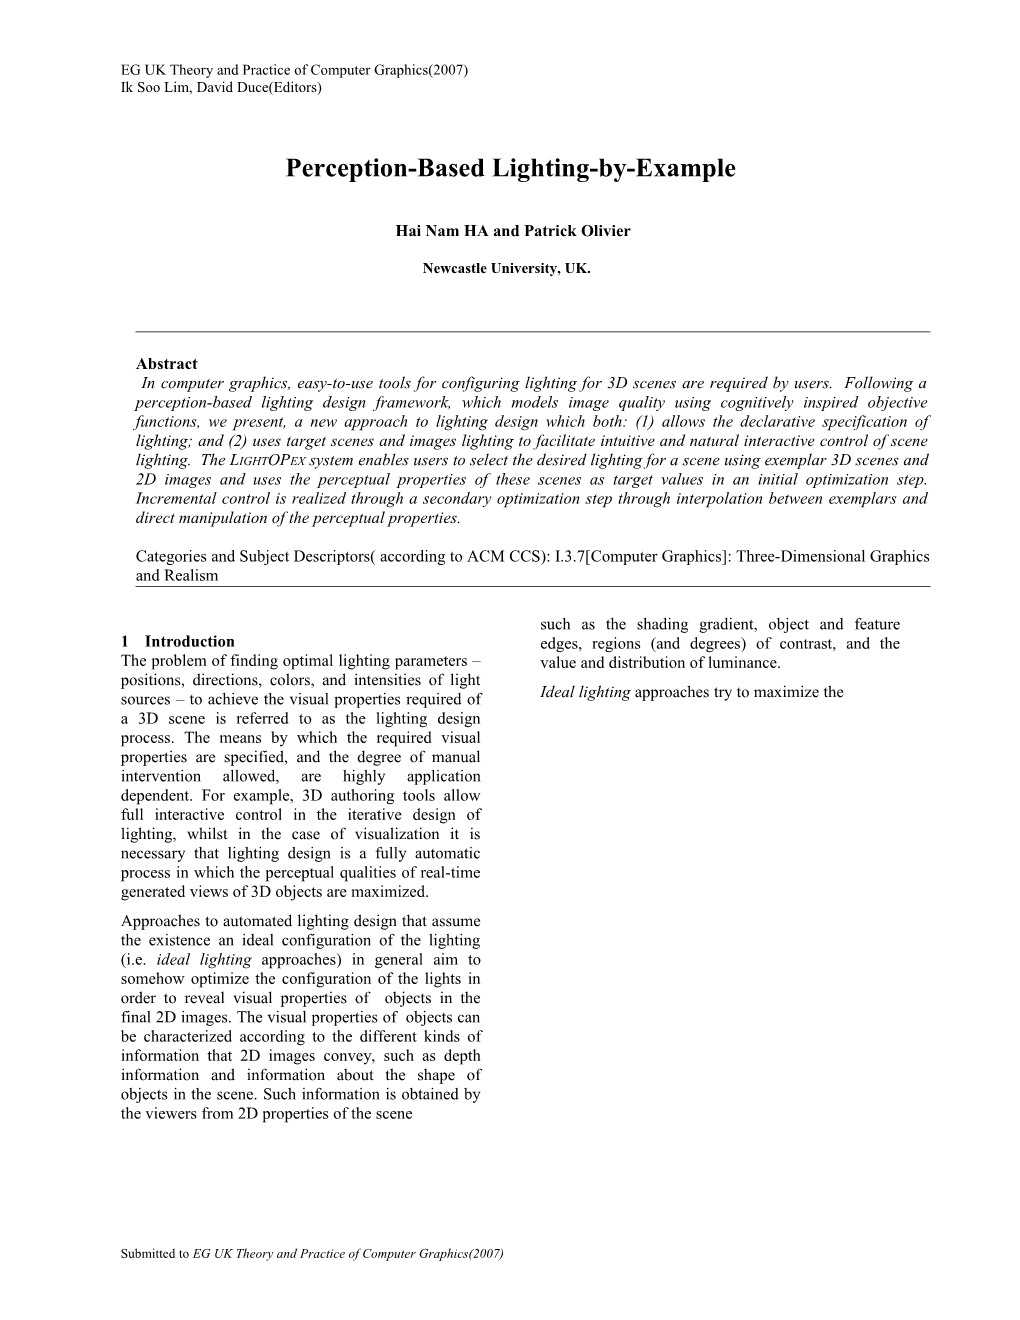 Perception-Based Lighting by Example